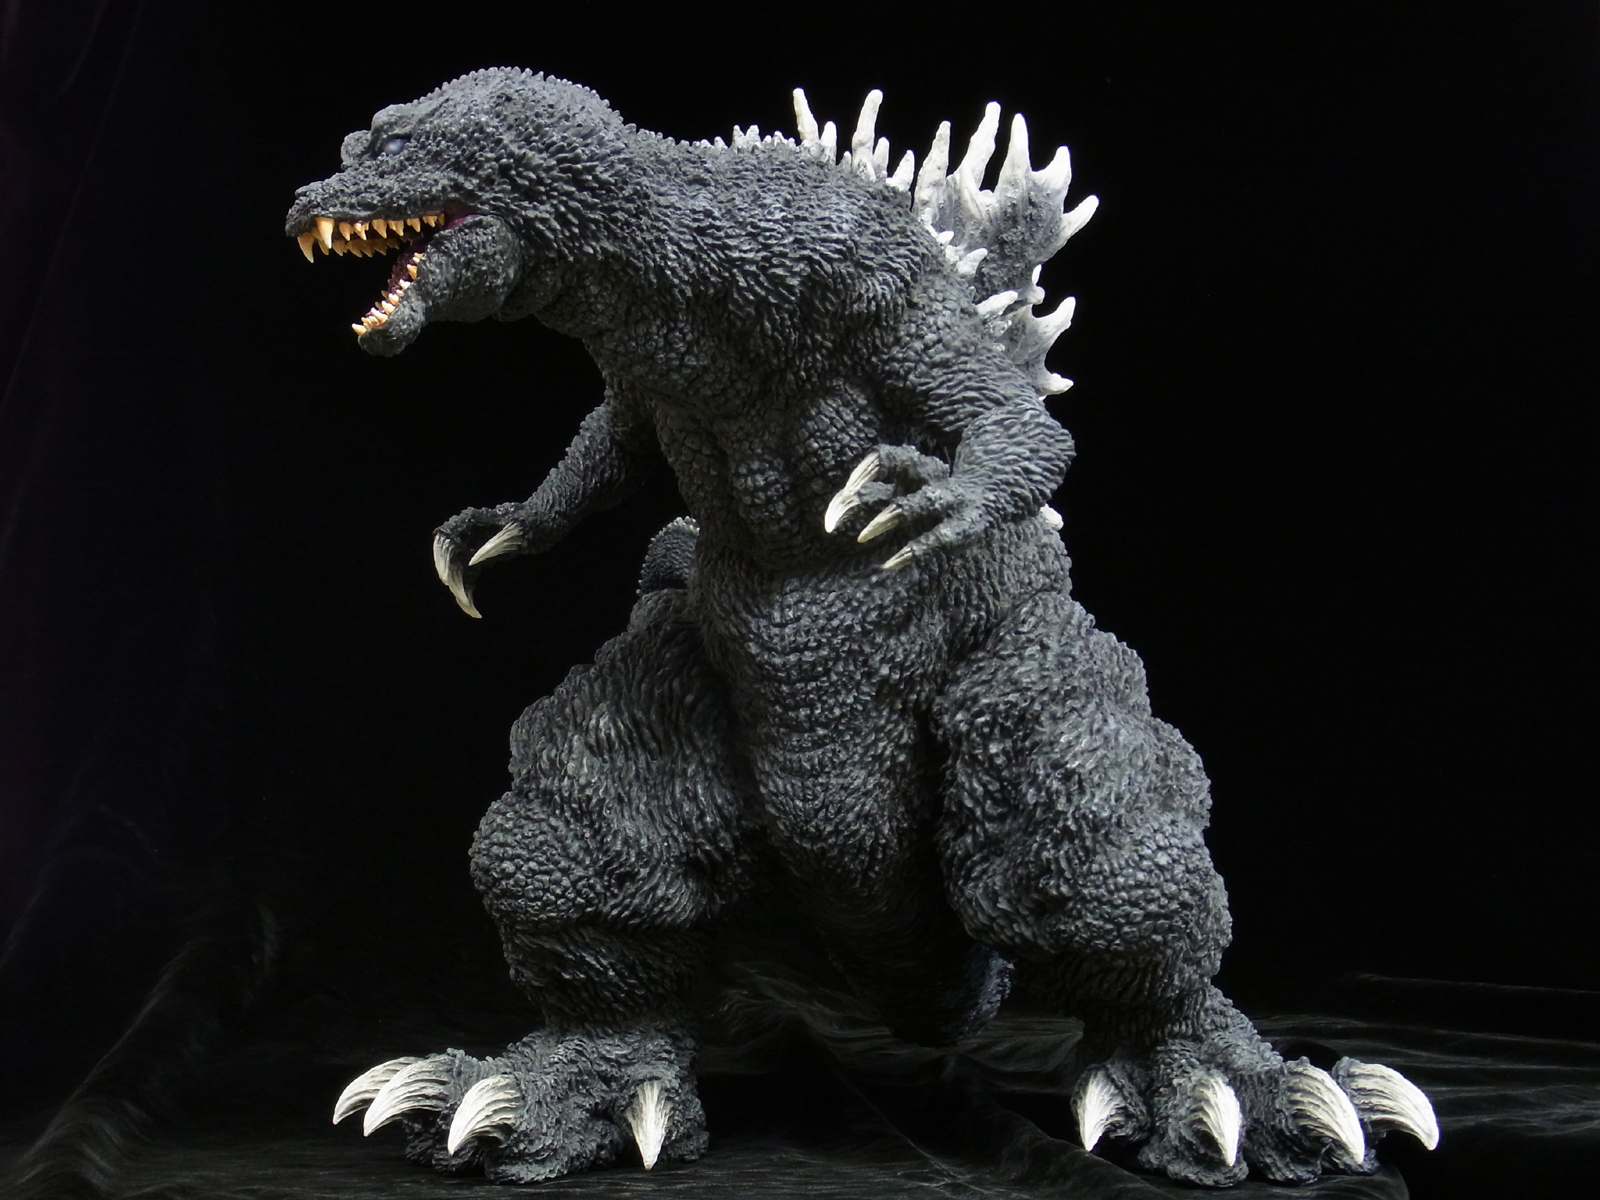 X Plus Launches New 'Gigantic Series' With Godzilla 2001